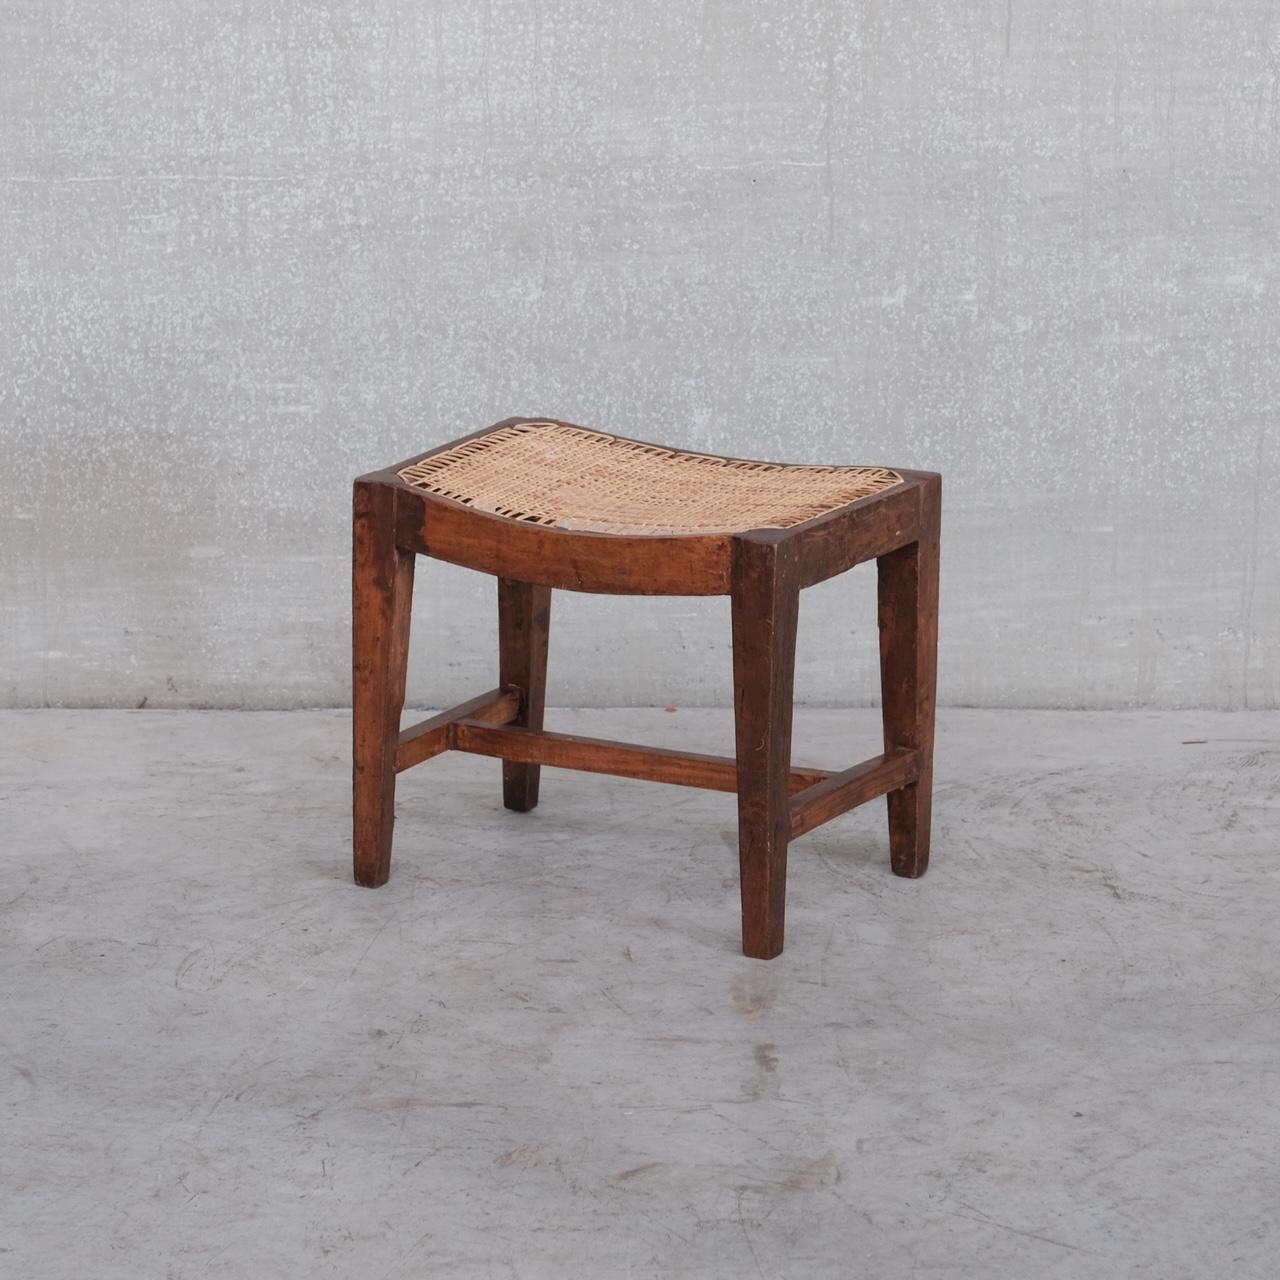 An original Pierre Jeanneret wooden stool.

India, Chandigargh, c1960s. 

Solid teak. 

PJ-SI-24-A Model. 

Caned top with bowed seat for comfort. 

A old metal label remains to one side which can be removed upon request. 

Some wear